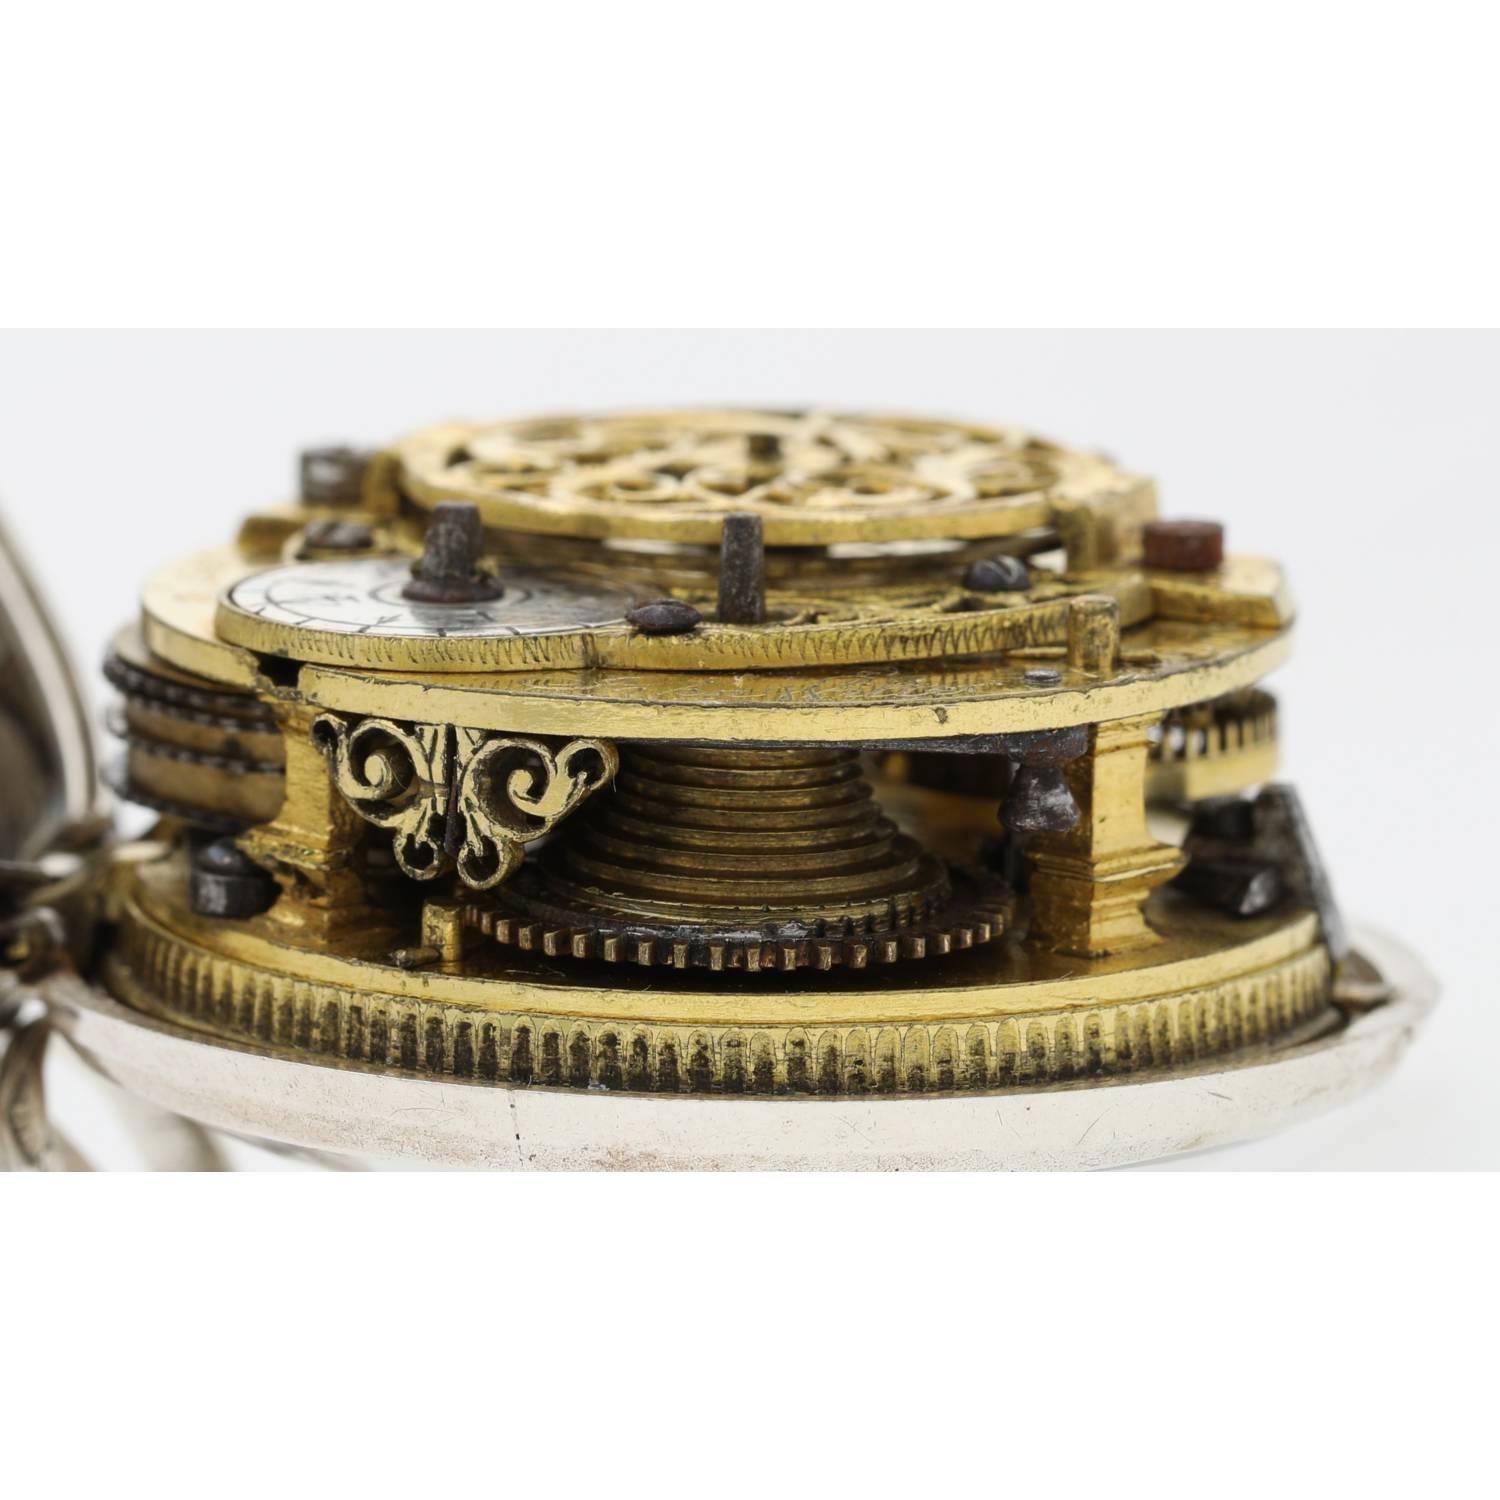 John Wilter, London - George II English silver repoussé pair cased verge pocket watch, London - Image 5 of 10